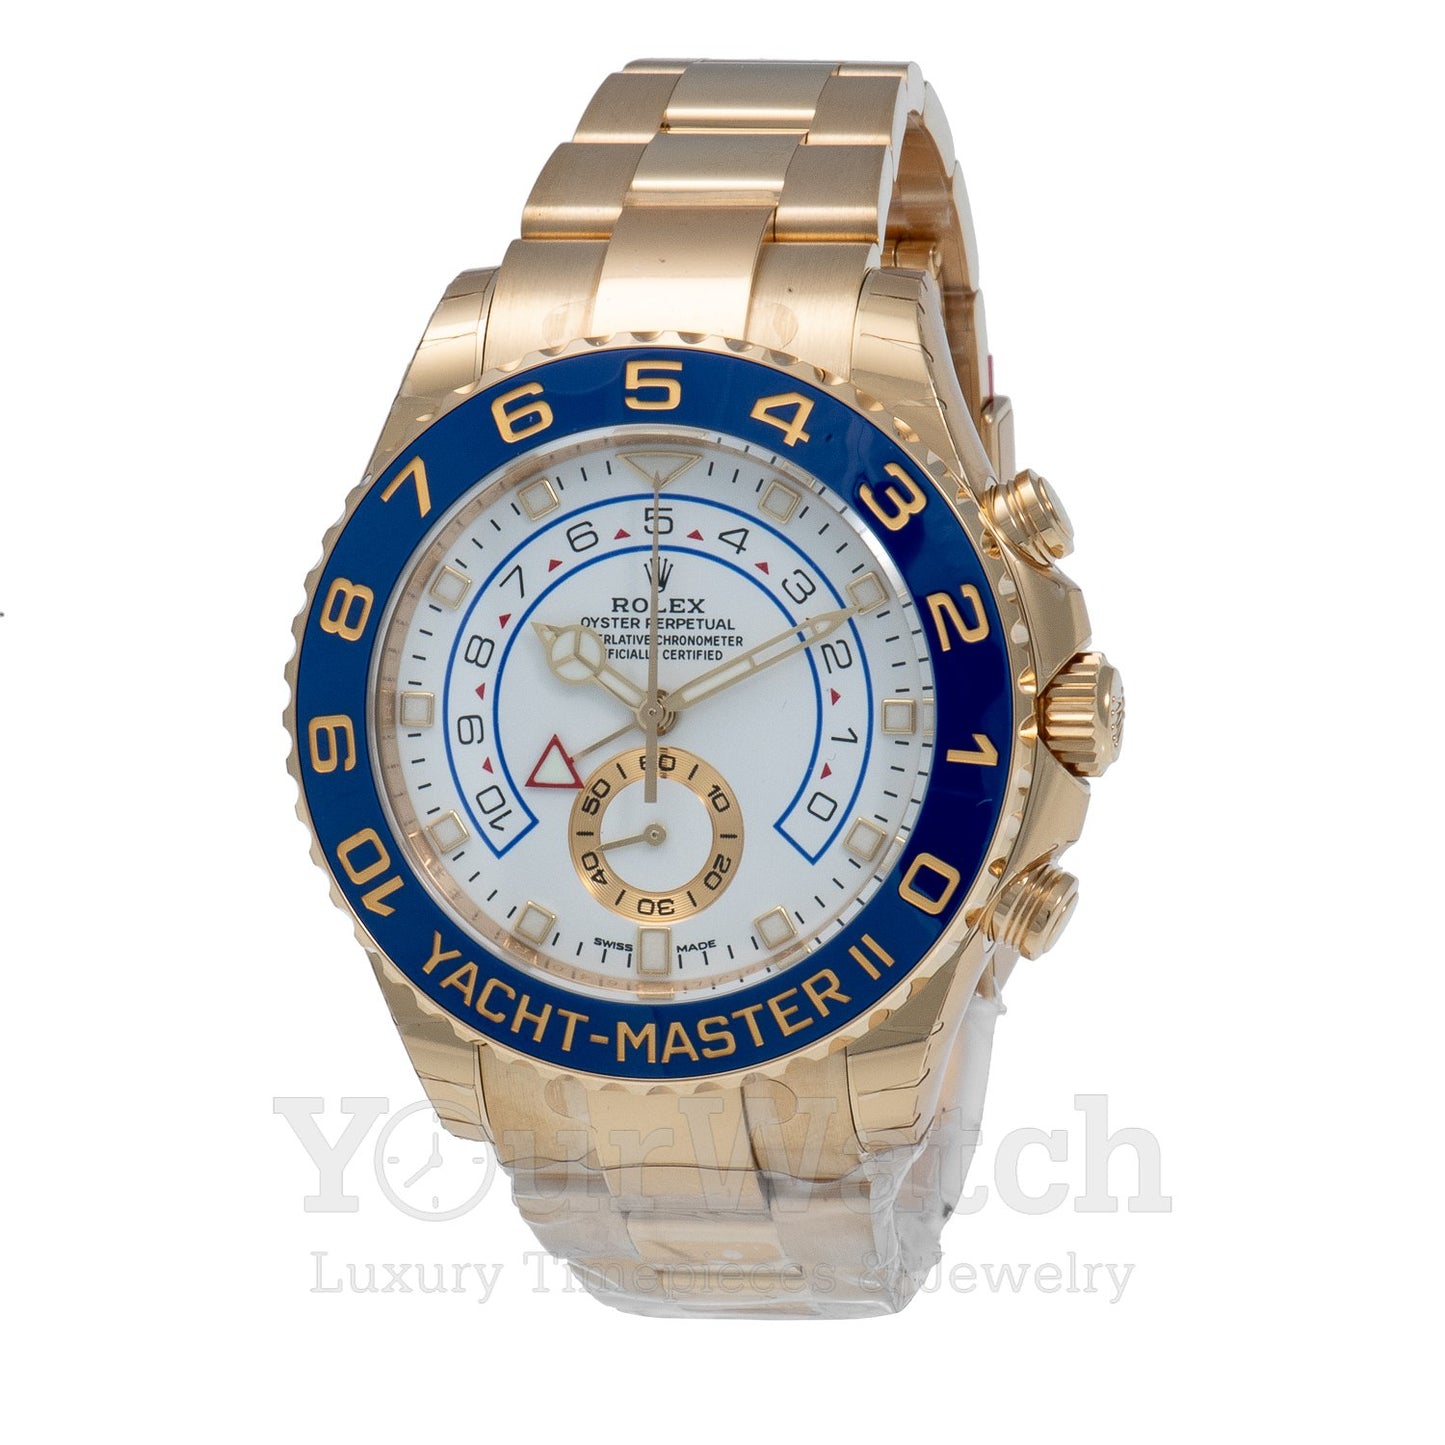 Rolex Yacht-Master II 18k Yellow Gold White Dial Ceramic 44mm Watch V  116688 - Jewels in Time